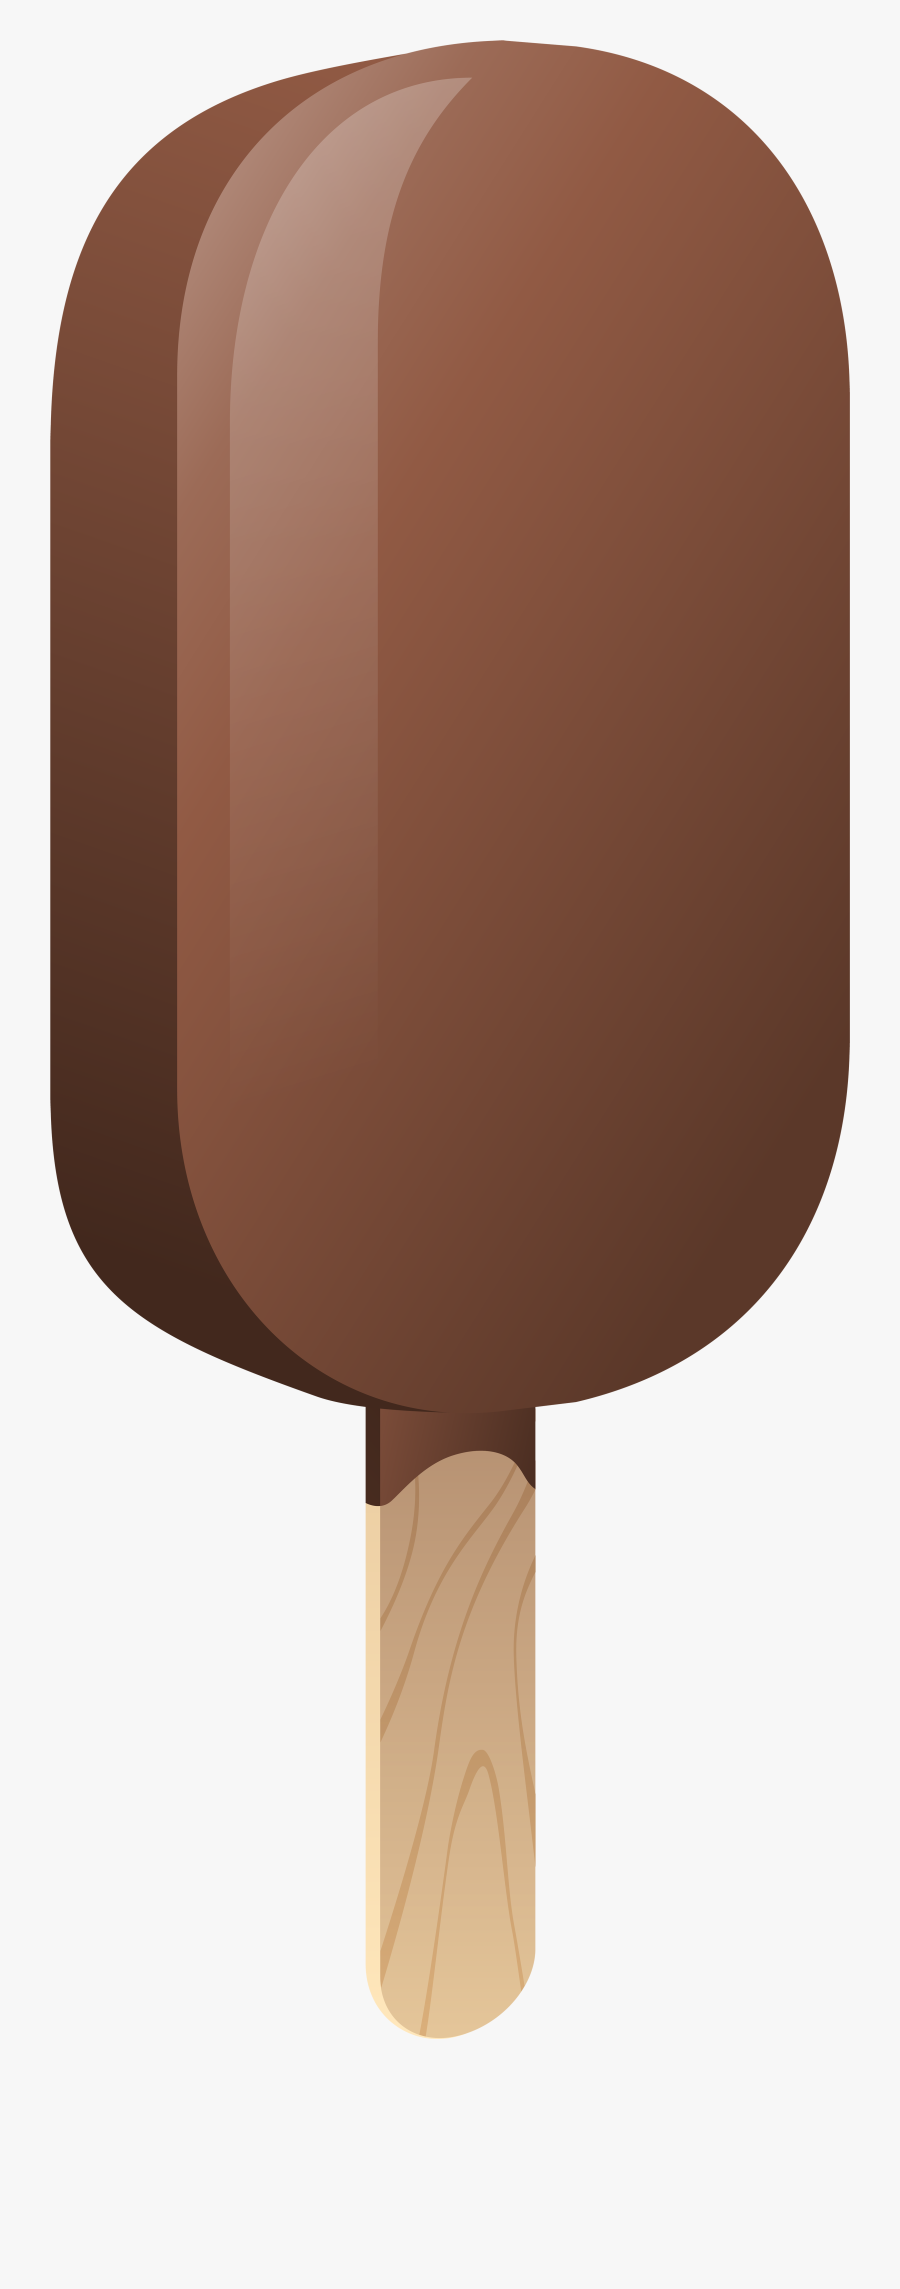 Jpg Freeuse Stock Ice Cream Png Clip Art Image Gallery - Wood, Transparent Clipart